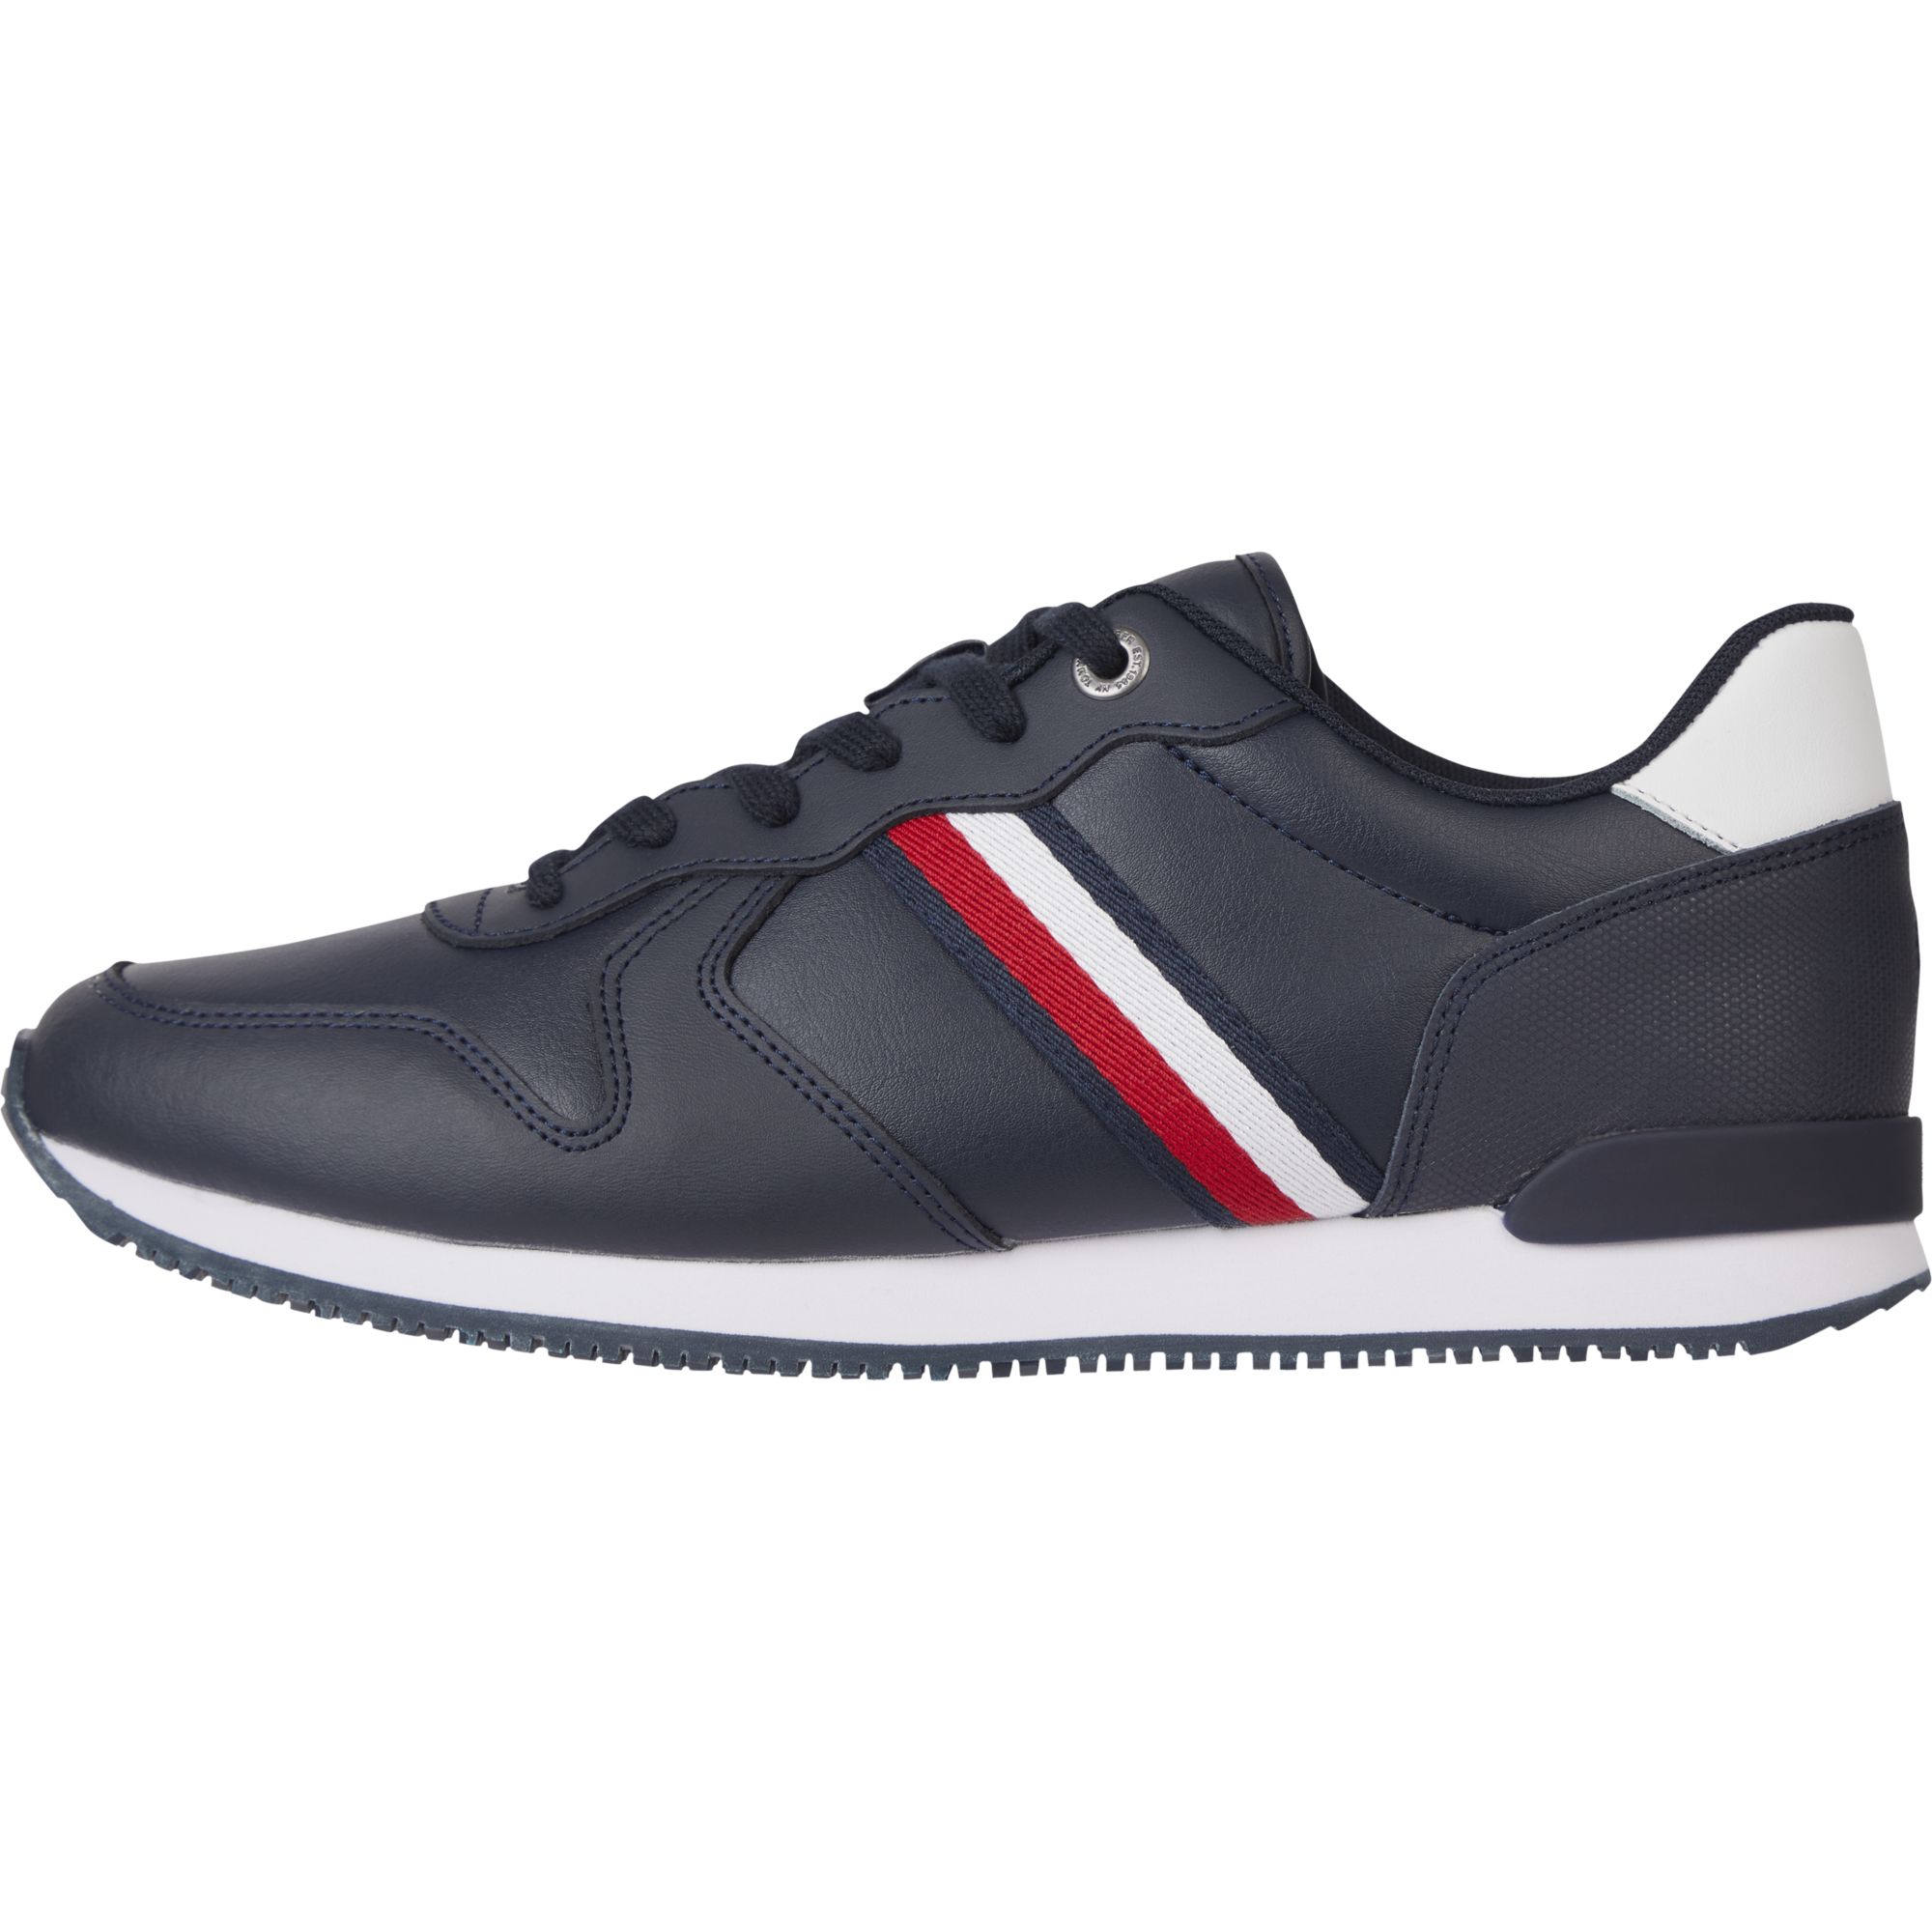 Iconic Runner Leather Casual imagine 2022